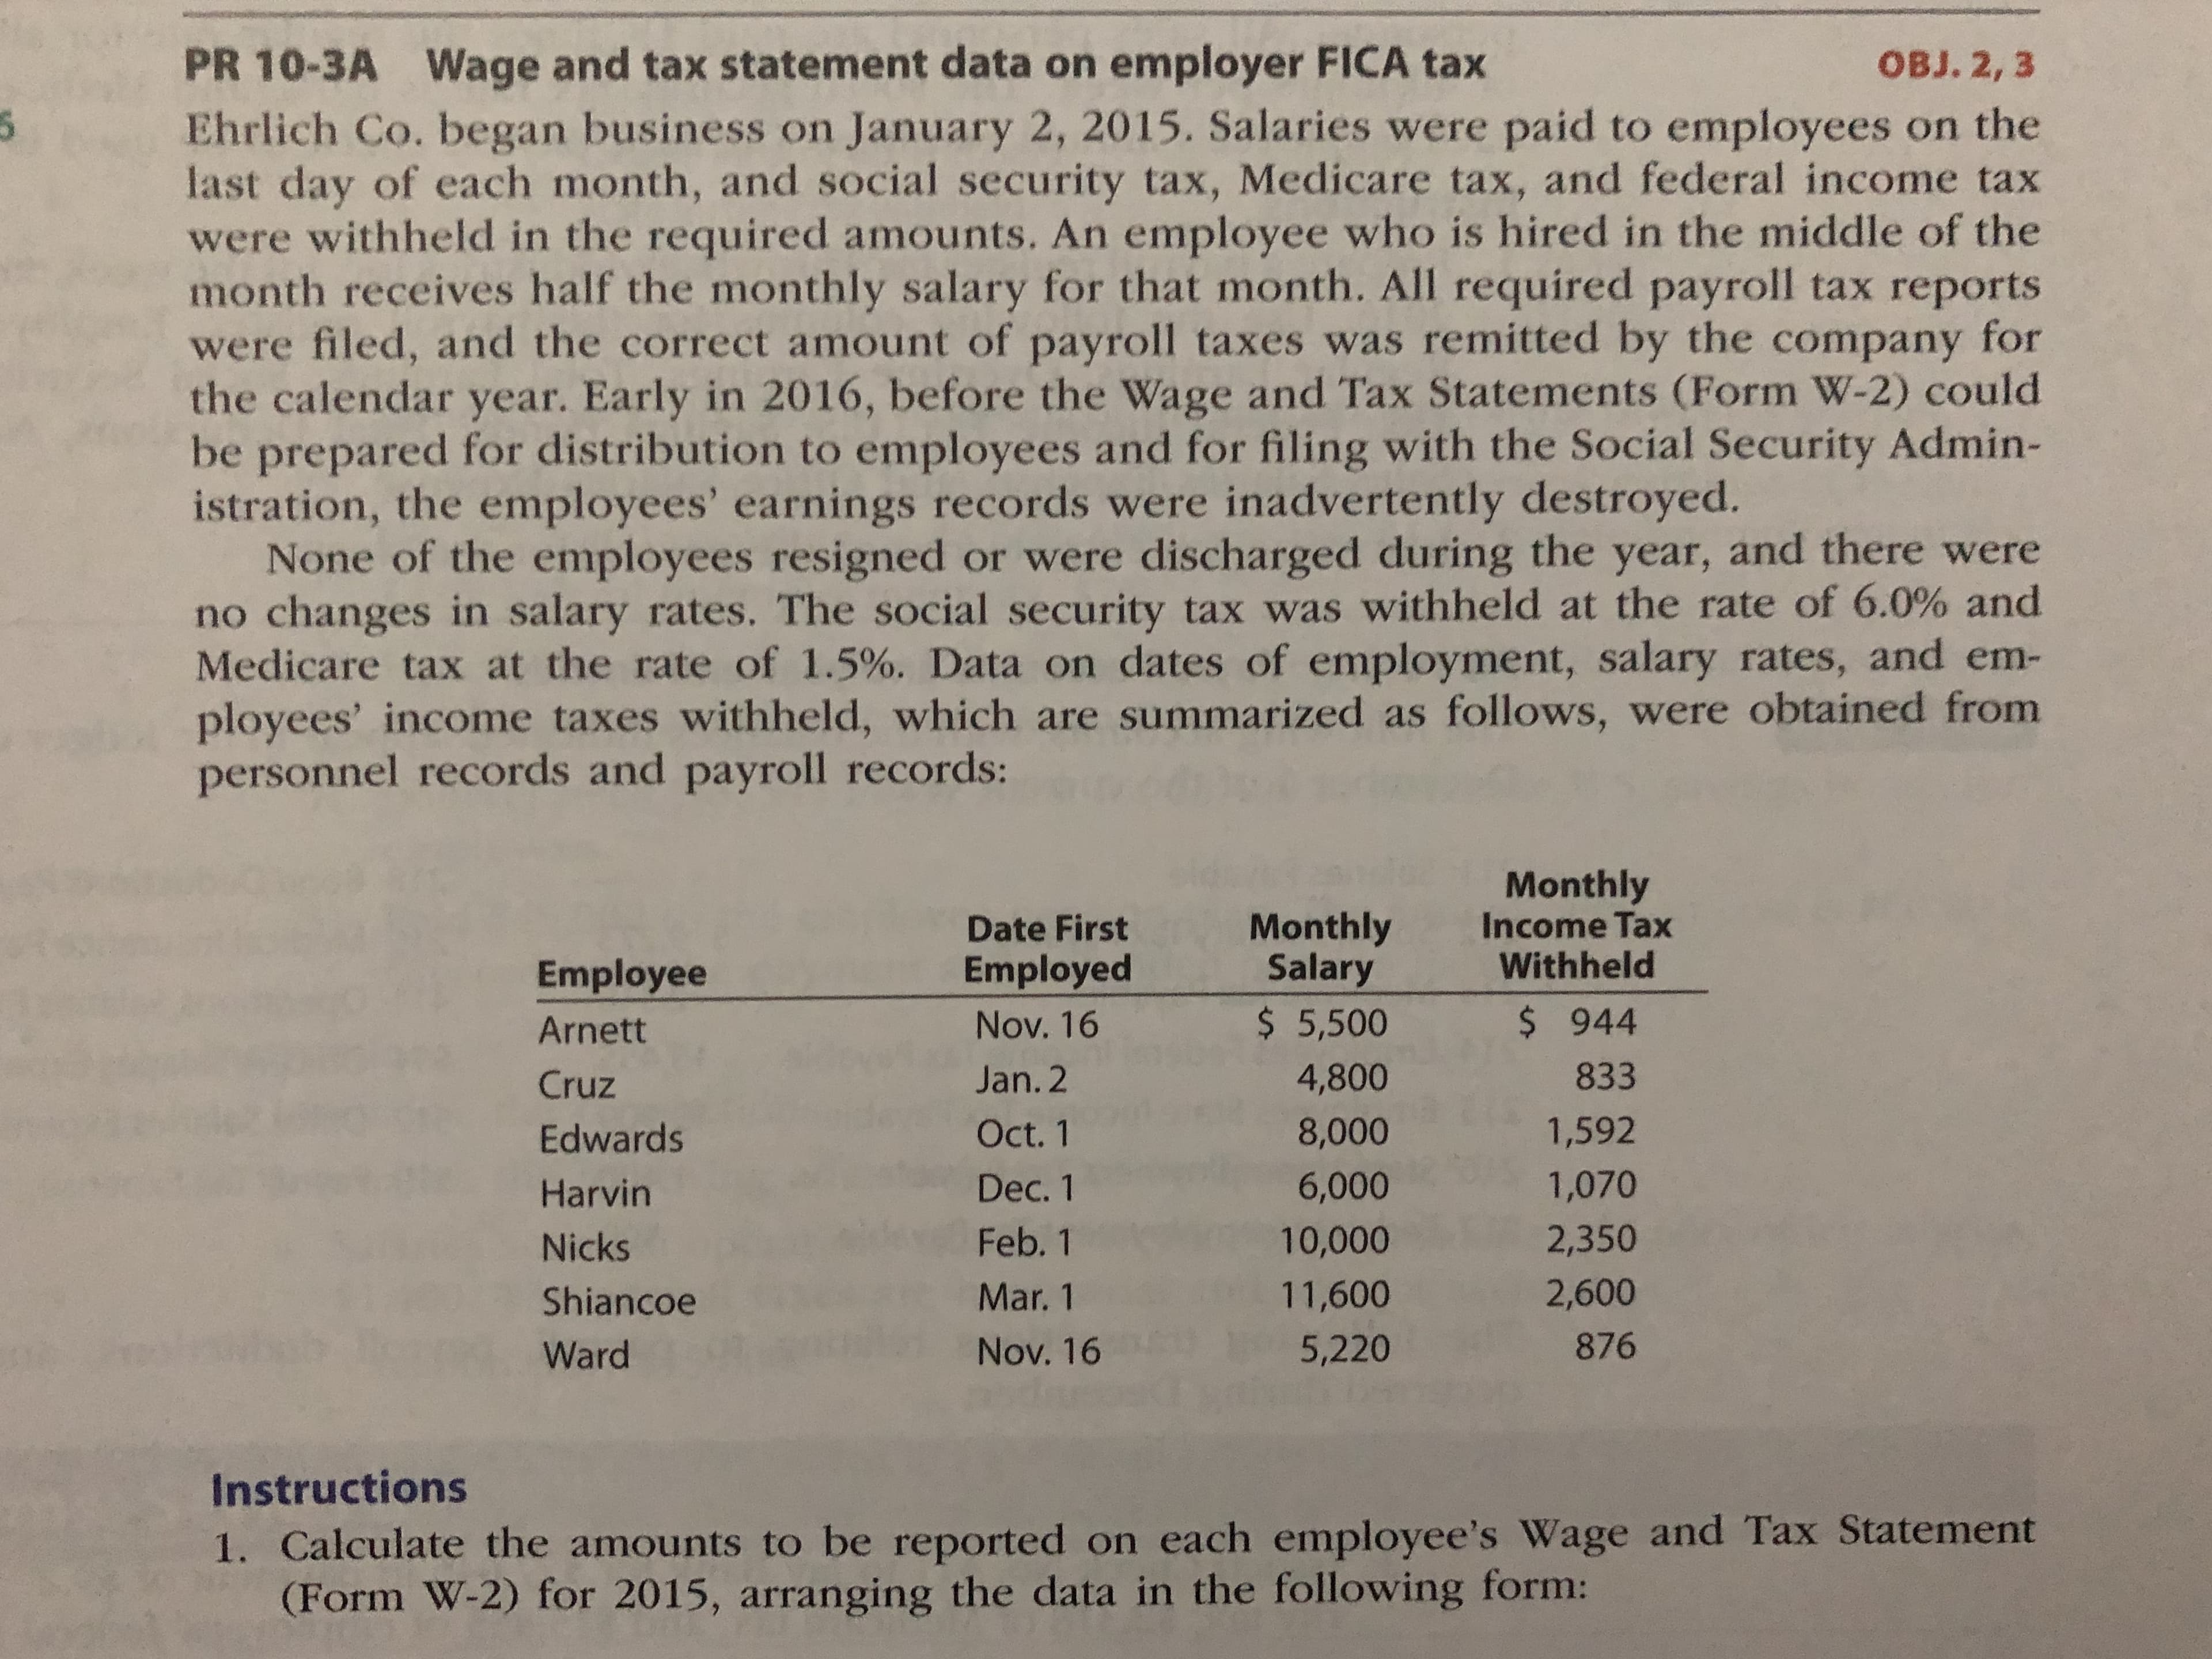 Instructions
1. Calculate the amounts to be reported on each employee's Wage and Tax Statement
(Form W-2) for 2015, arranging the data in the following form:
